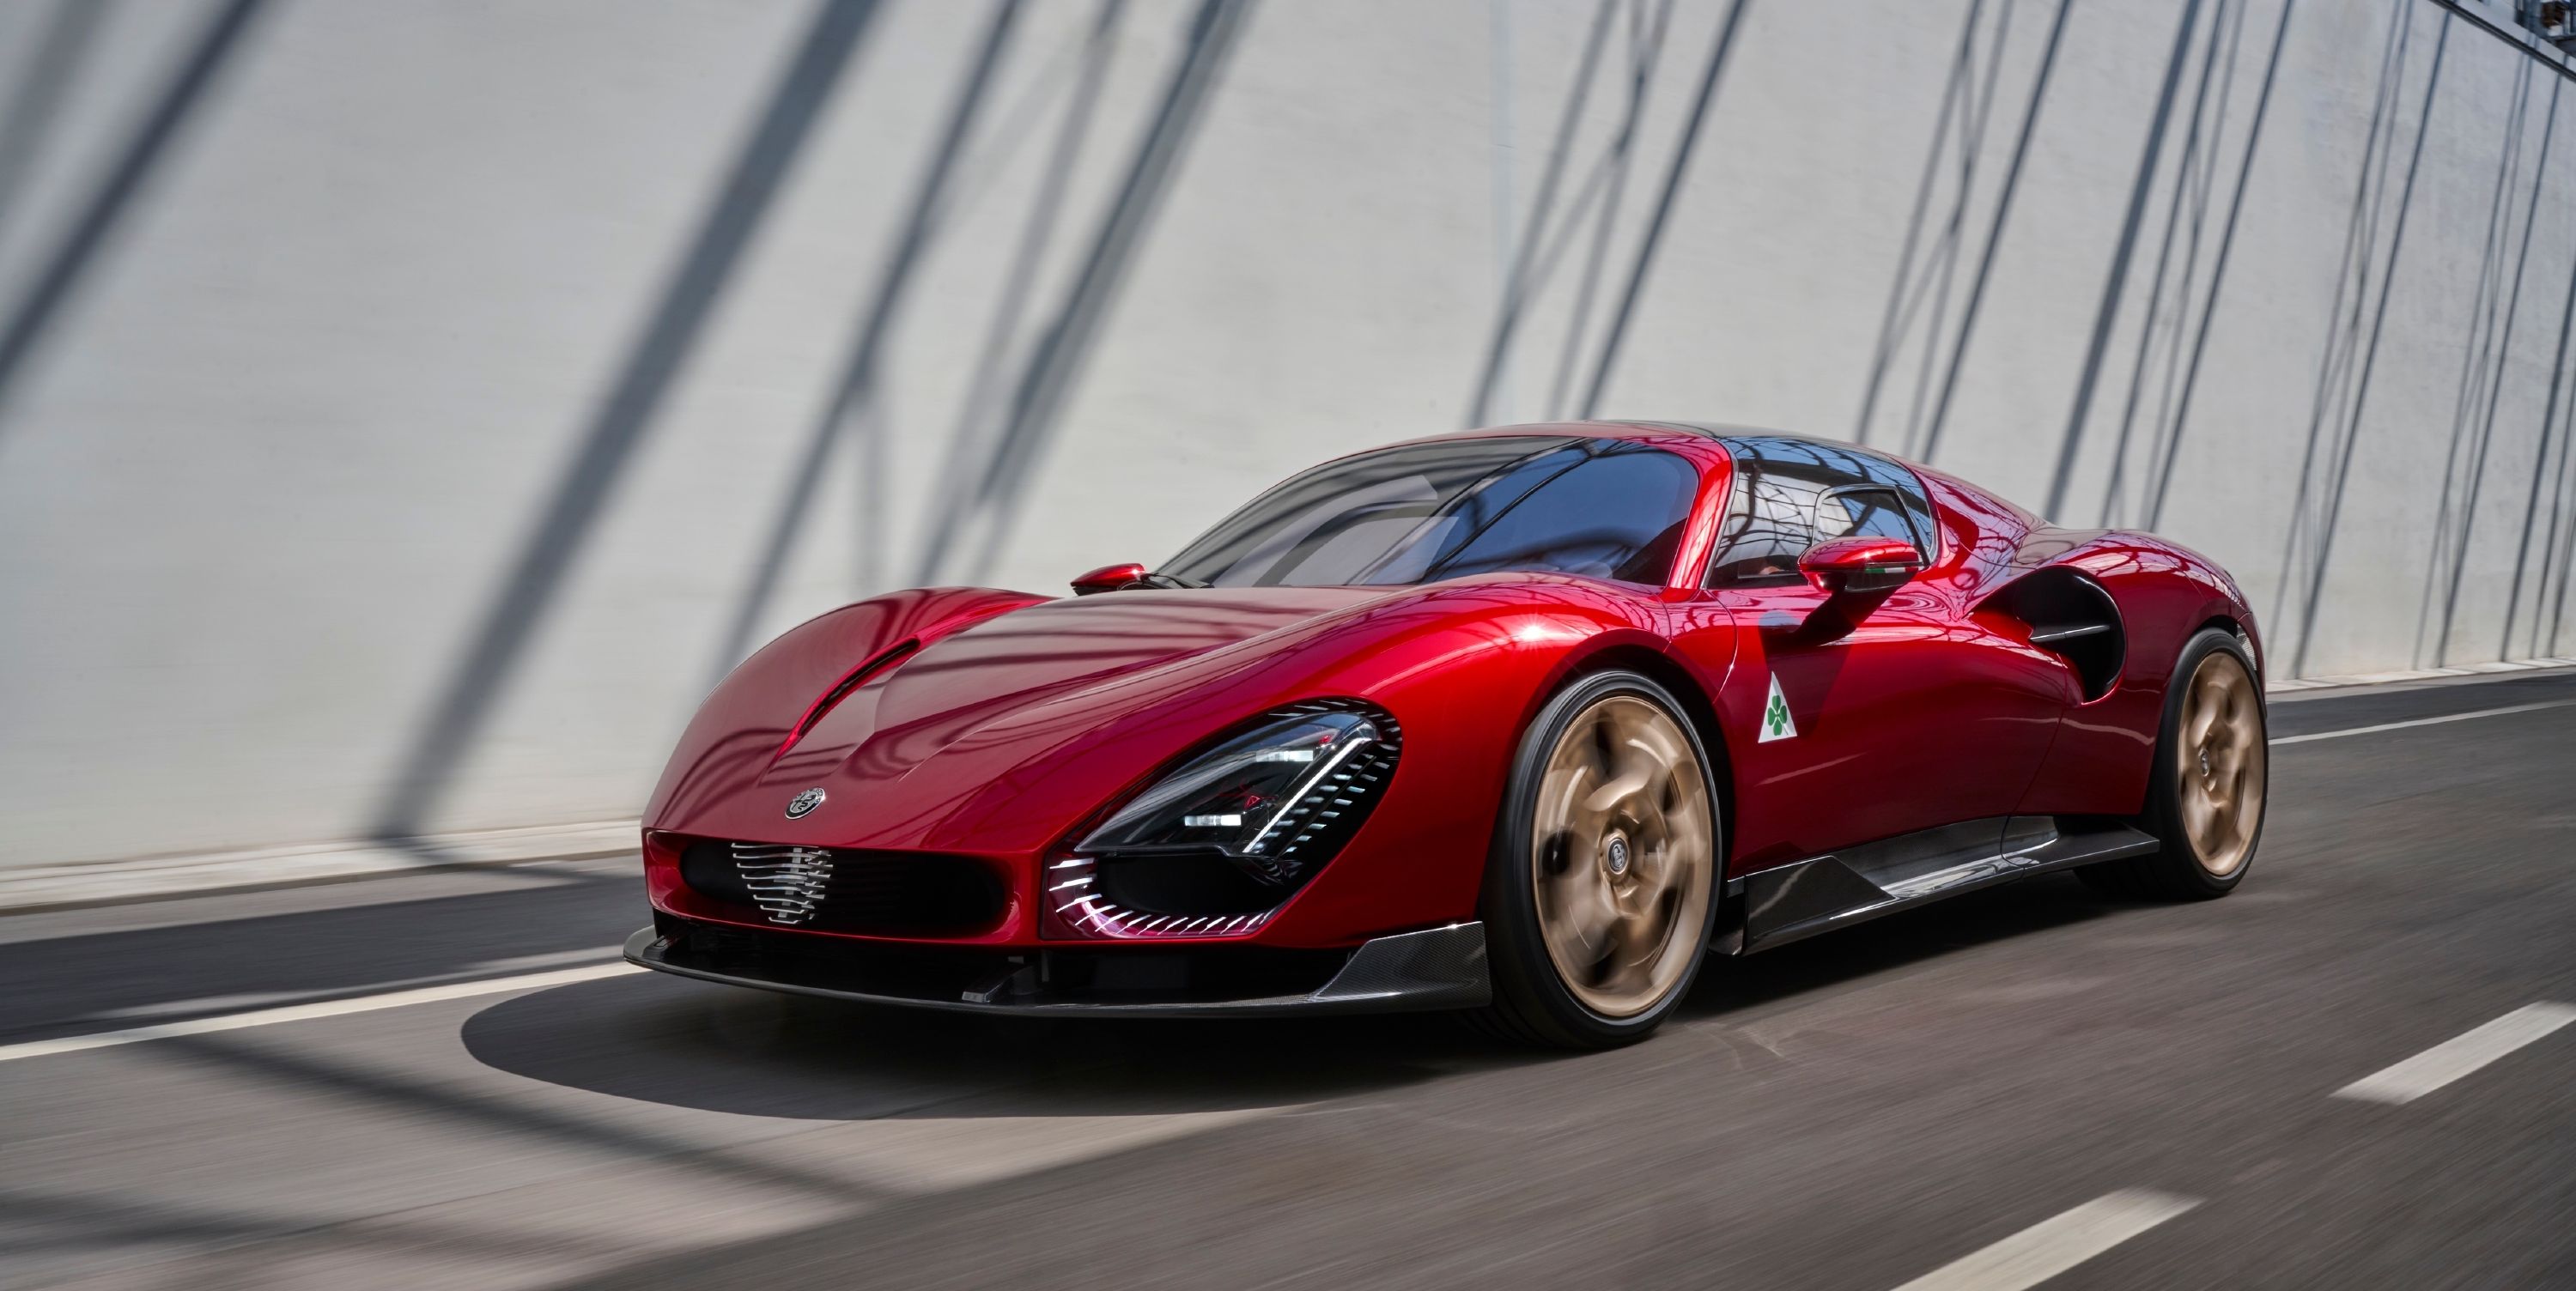 Alfa Romeo 33 Stradale Revives an Icon With Help From Maserati